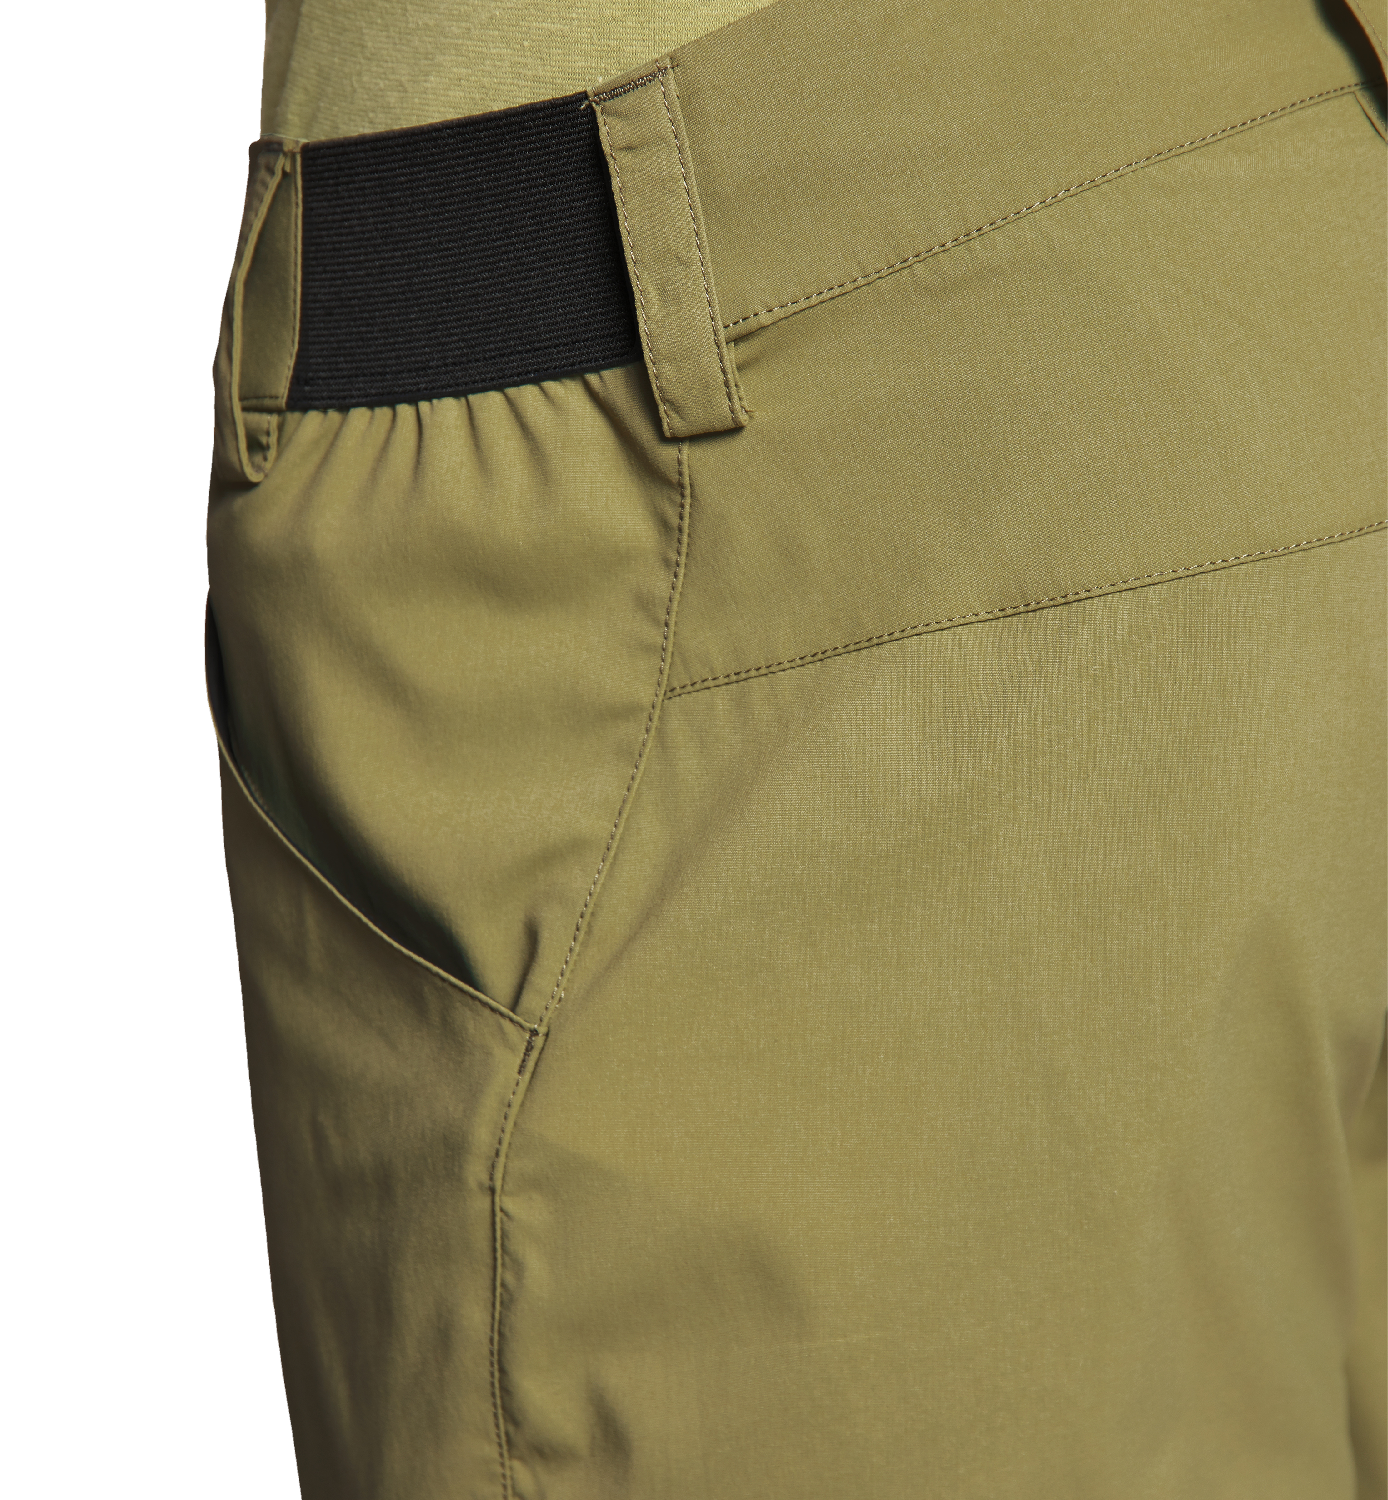 Cellar Door Leo T olive green cropped trousers for men